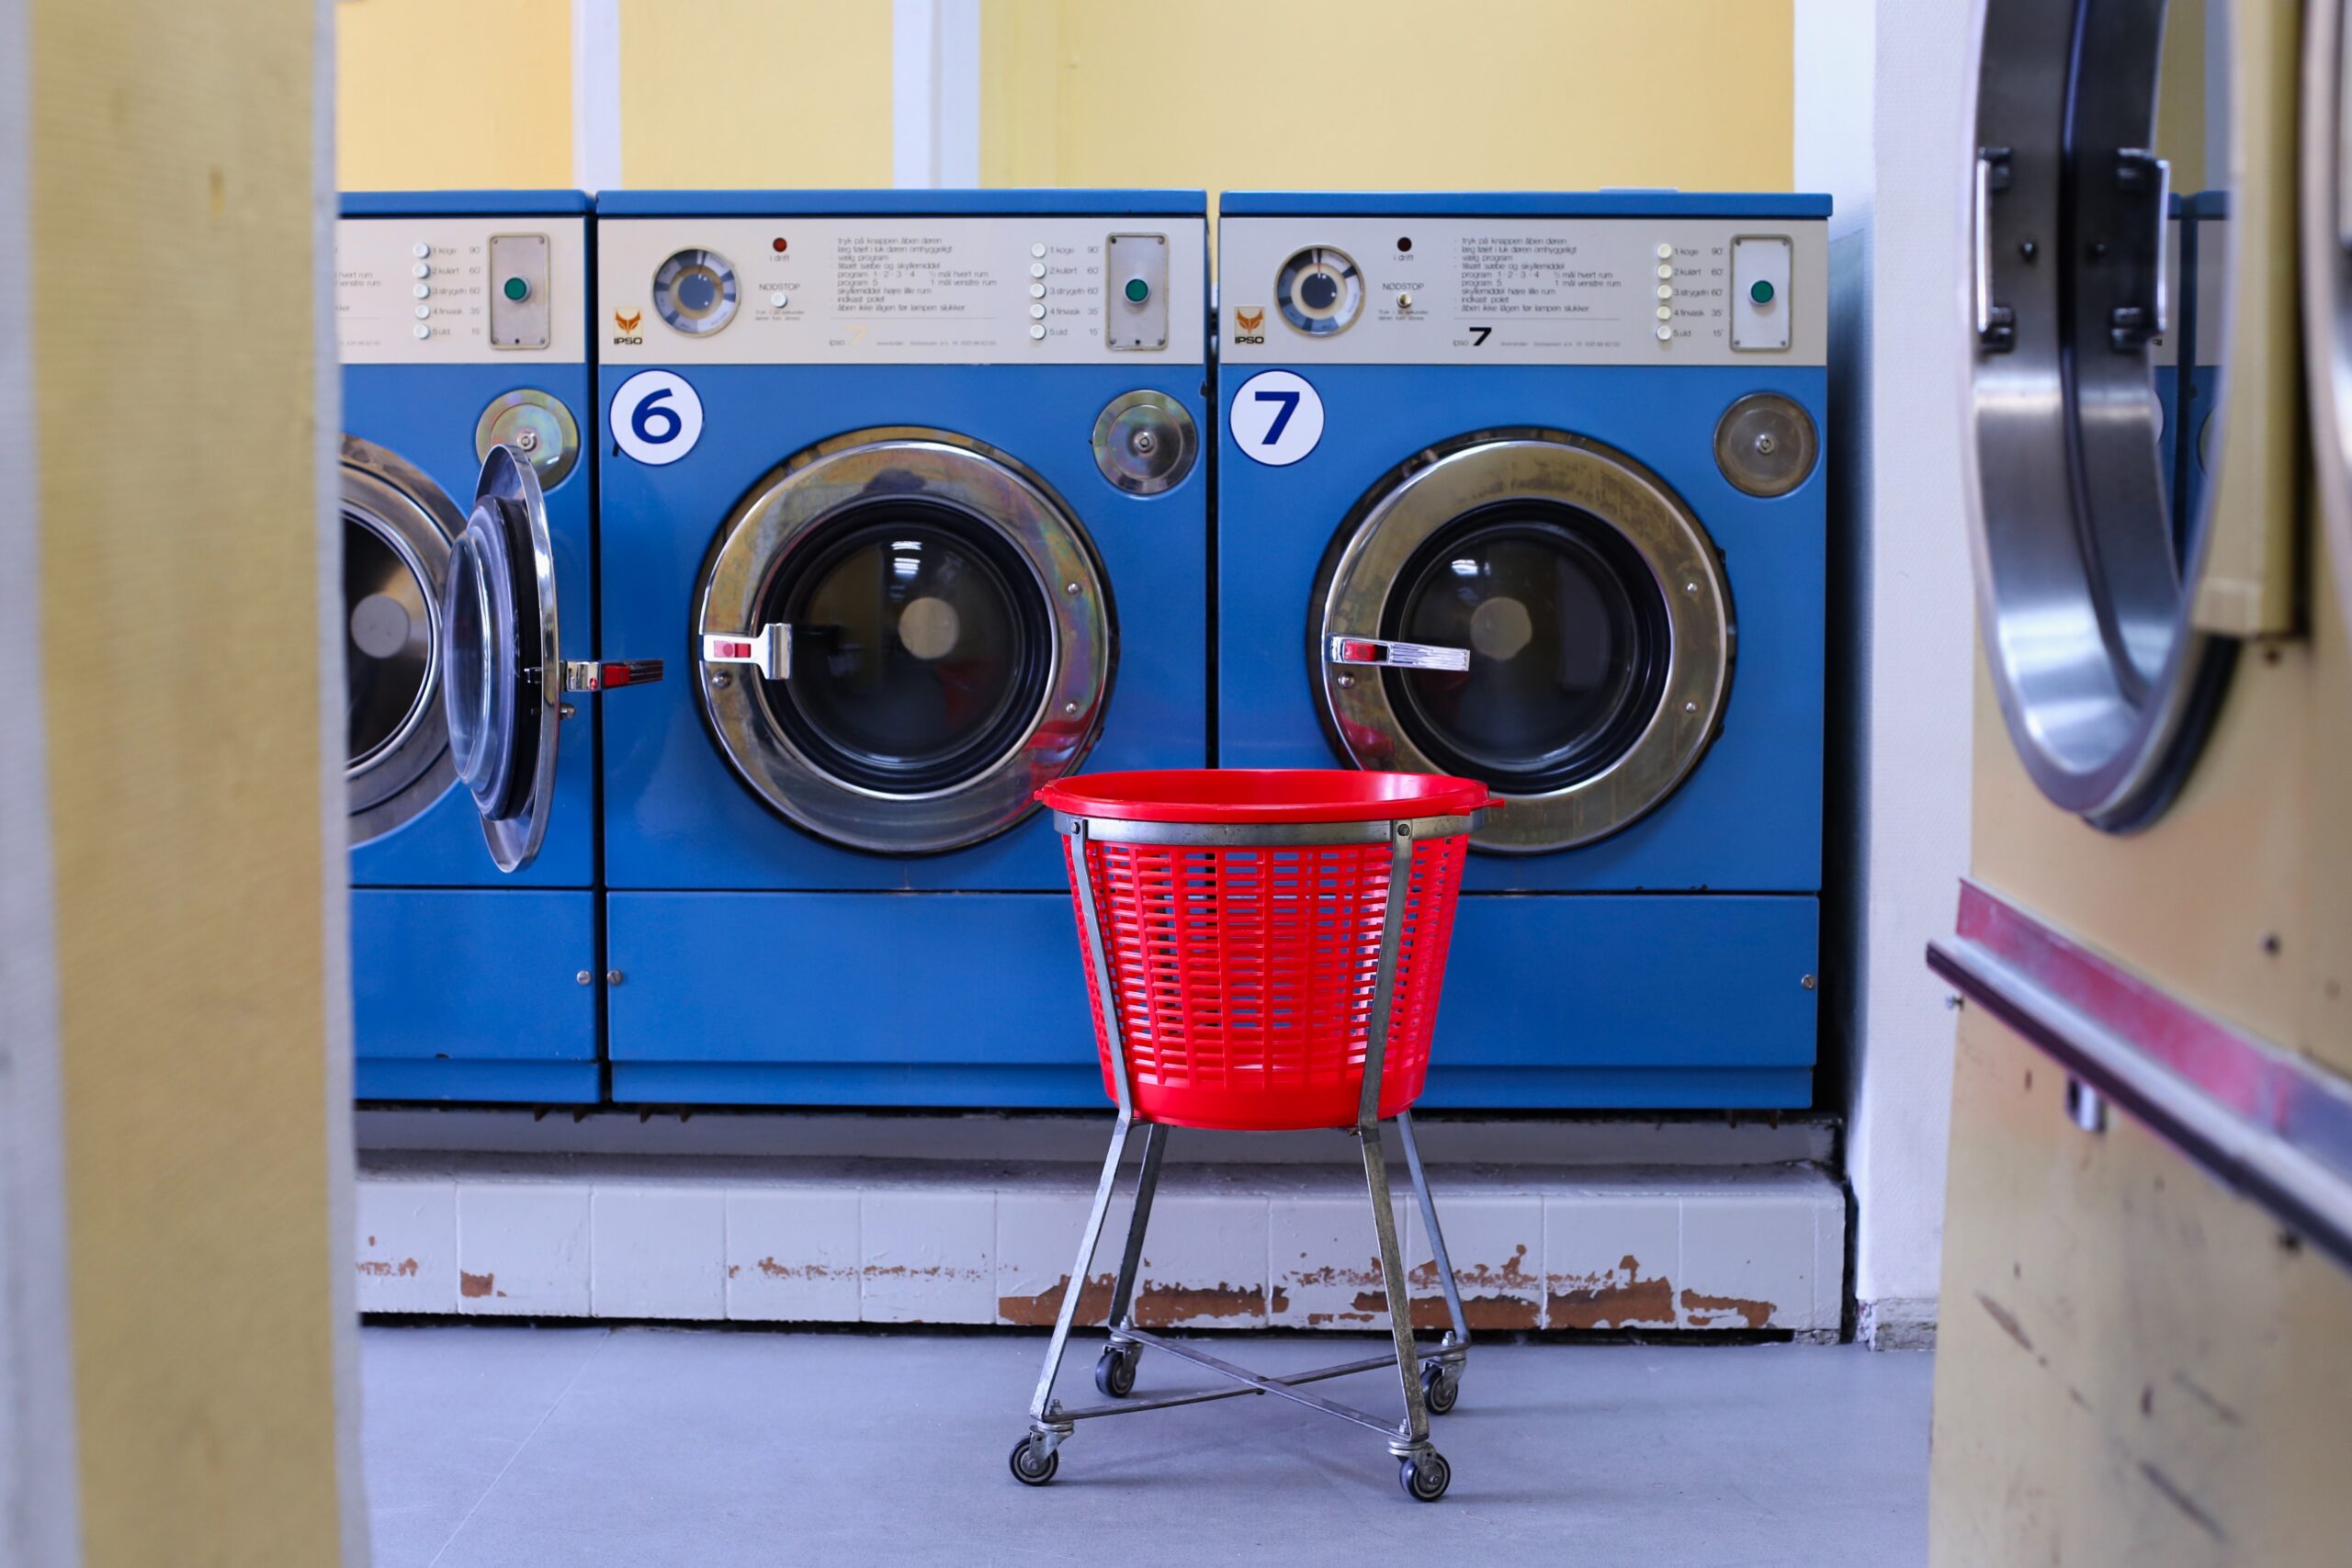 Laundry Services for Urban